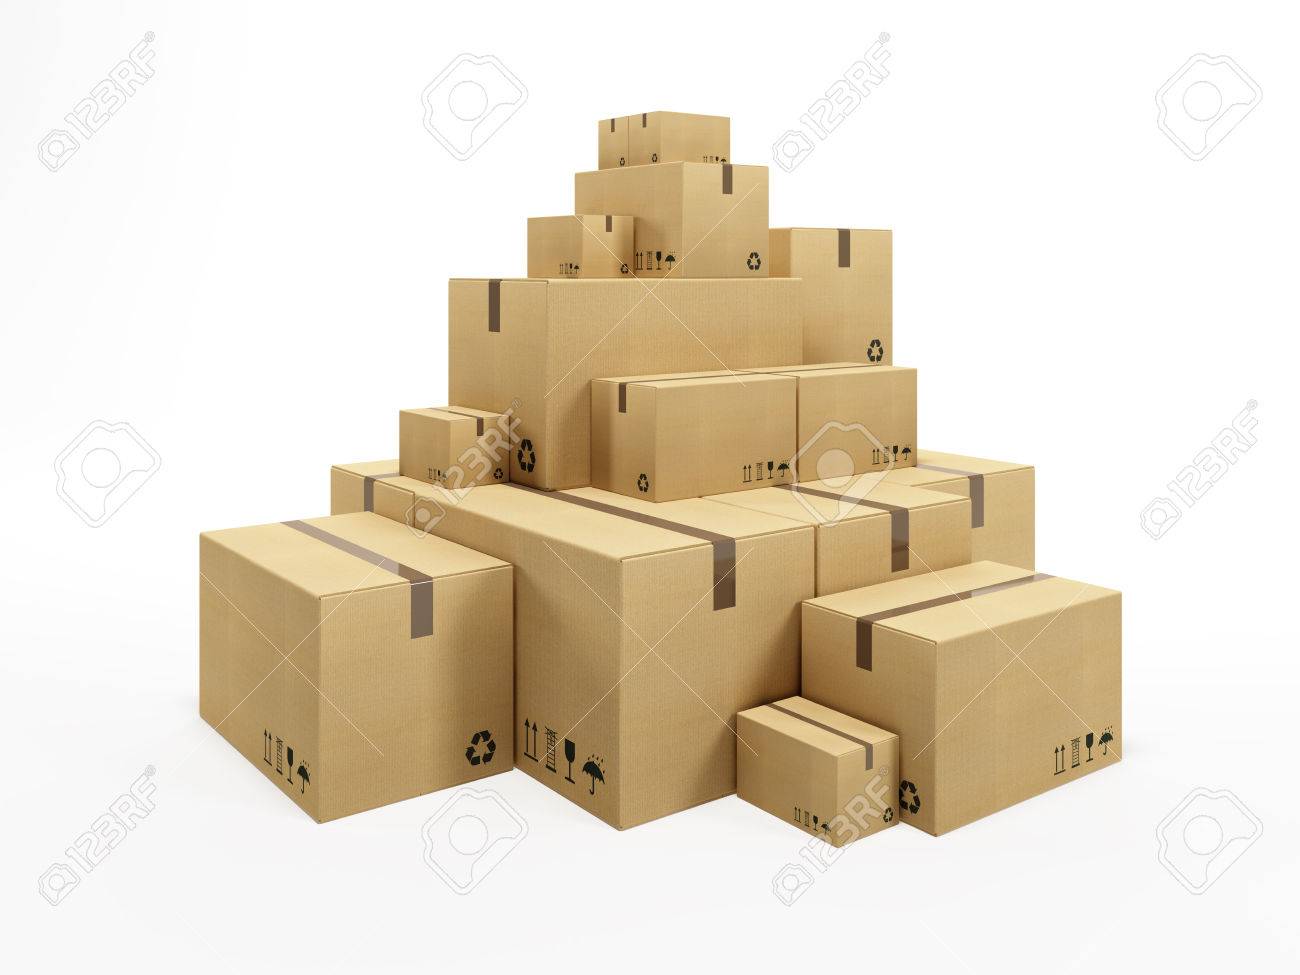 Pile Of Cardboard Box 3d Render Stock Photo Picture And Royalty